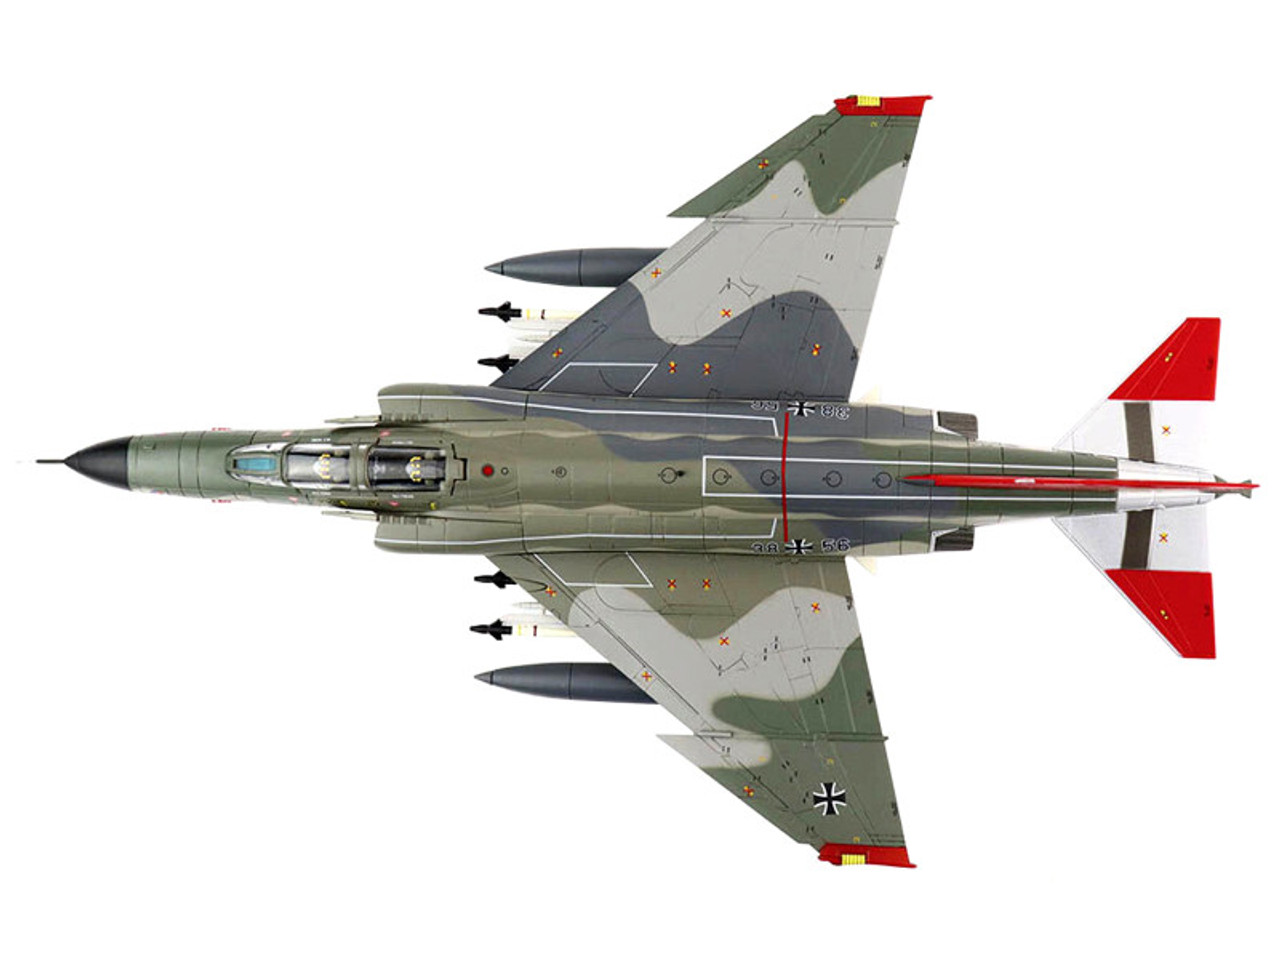 McDonnell Douglas F-4F Phantom II "Norm 81" Fighter Aircraft "JG 71 "Richthofen" GAFTIC 86 CFB Goose Bay Canada" (May 1986) "Air Power Series" 1/72 Diecast Model by Hobby Master